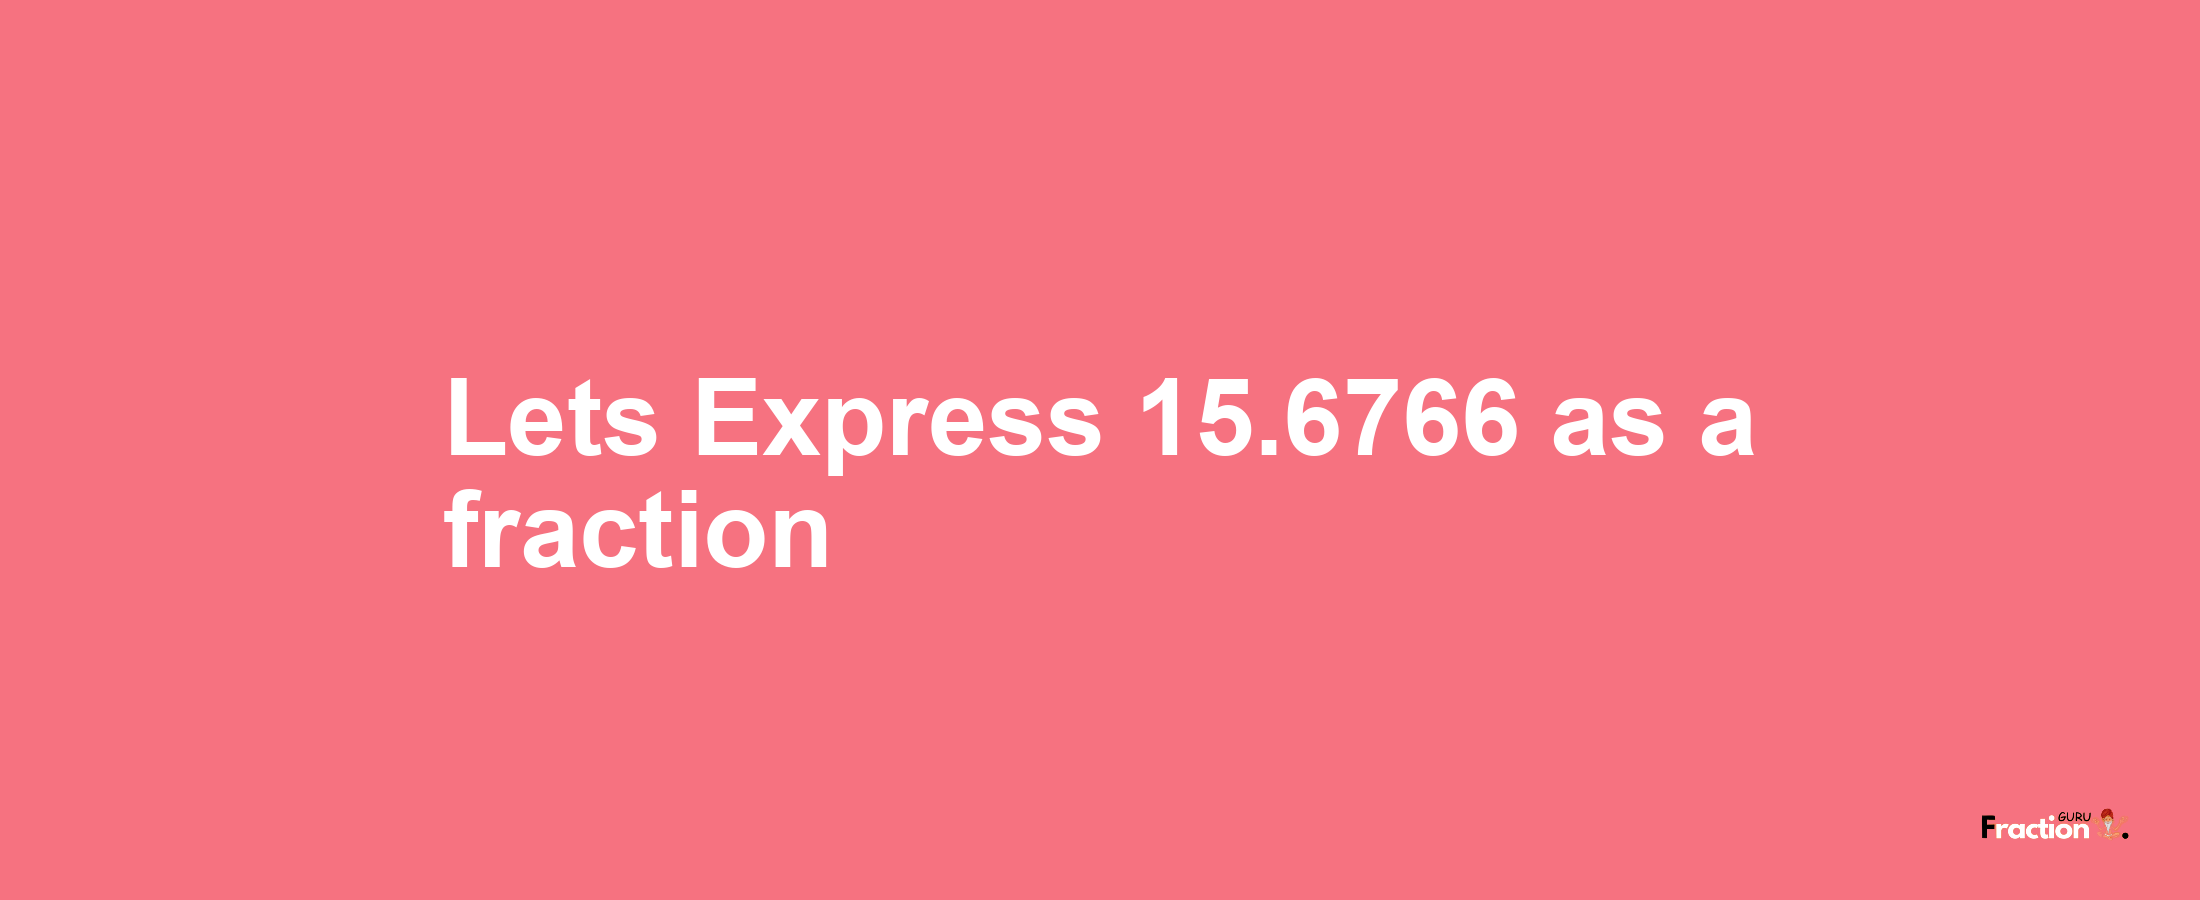 Lets Express 15.6766 as afraction